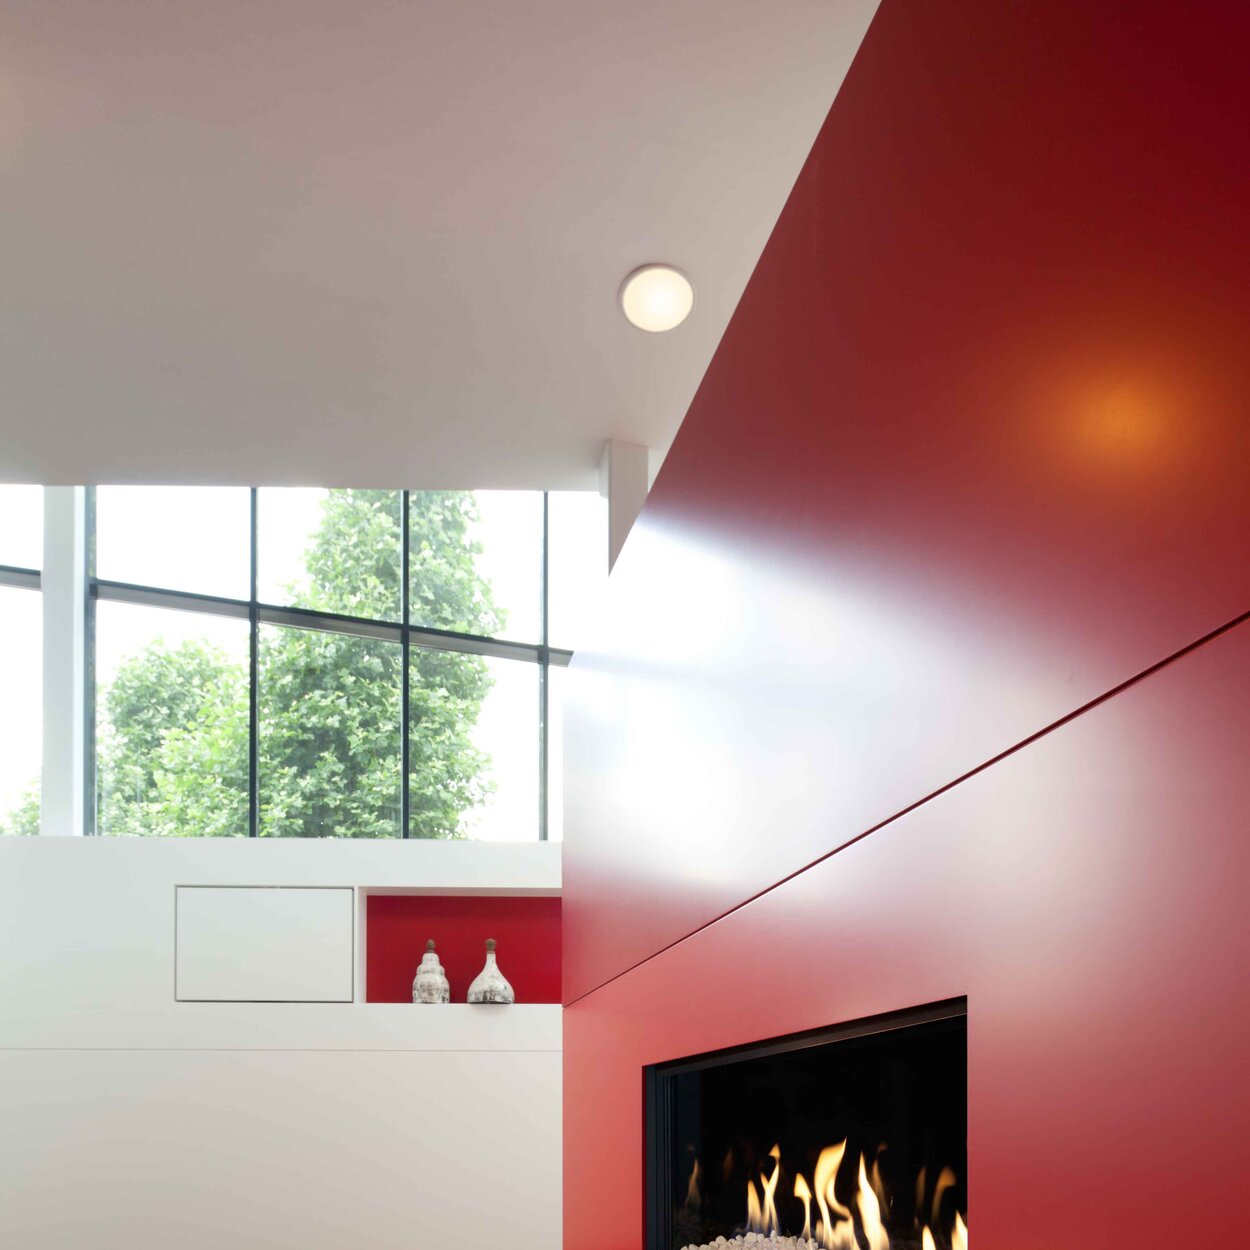 Gas fireplace G100/41F by Kalfire with white stones in the firebox built into a red wall